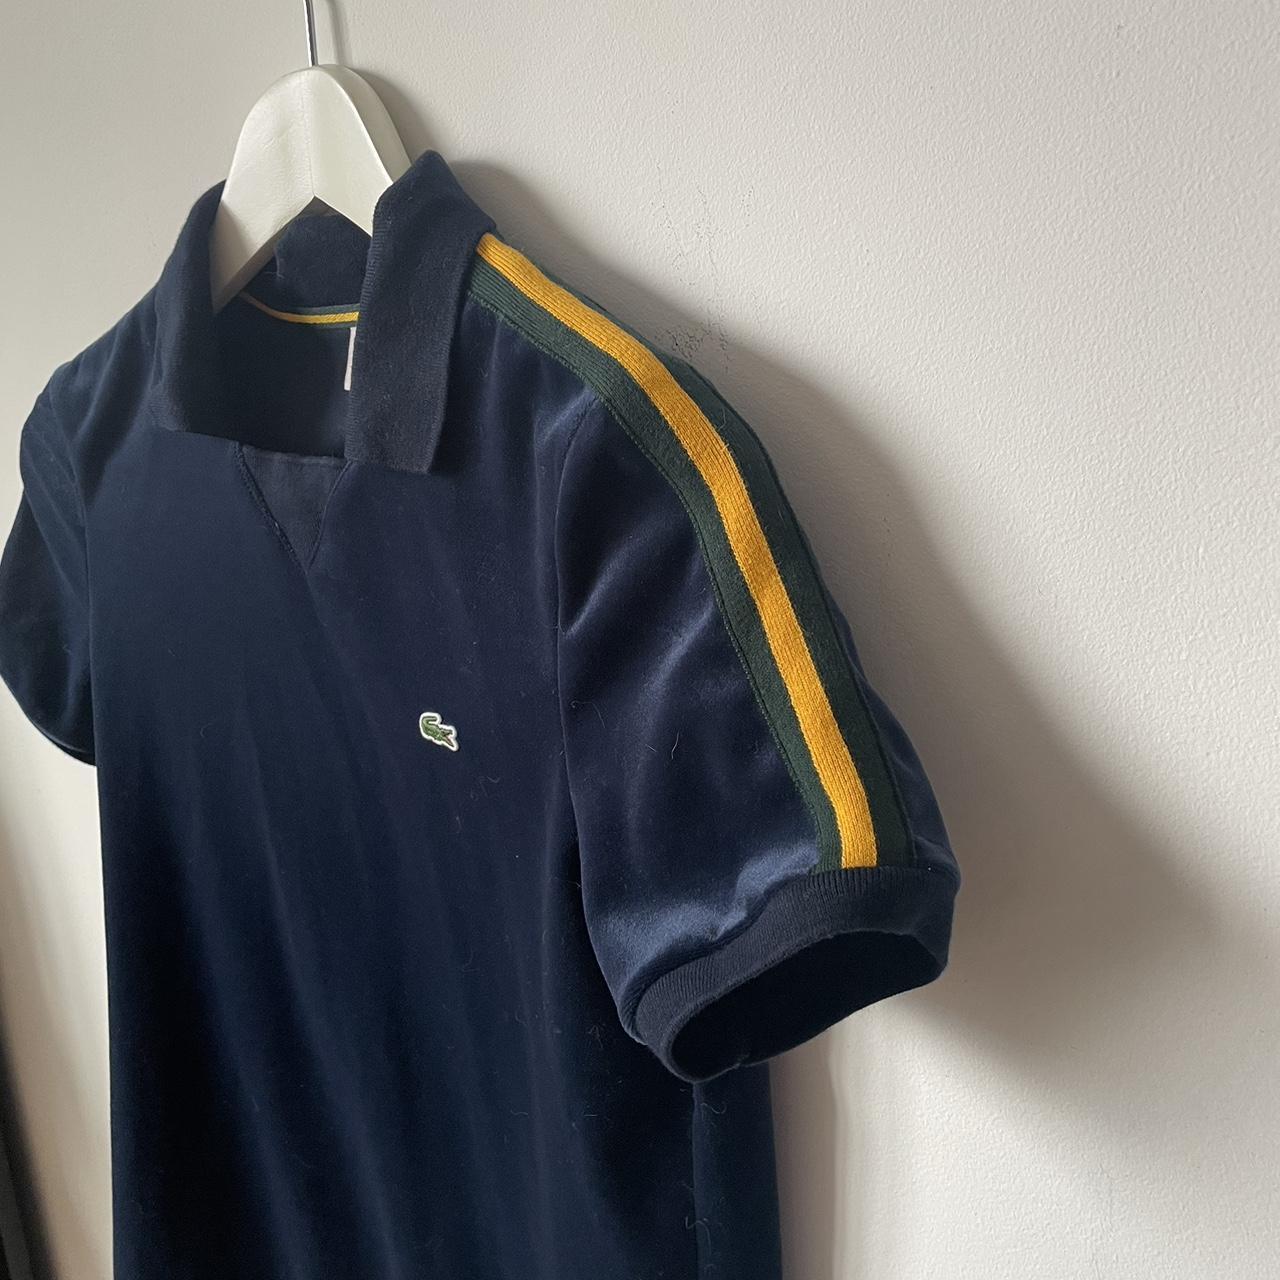 Lacoste Live Women's Navy and Yellow Polo-shirts (4)